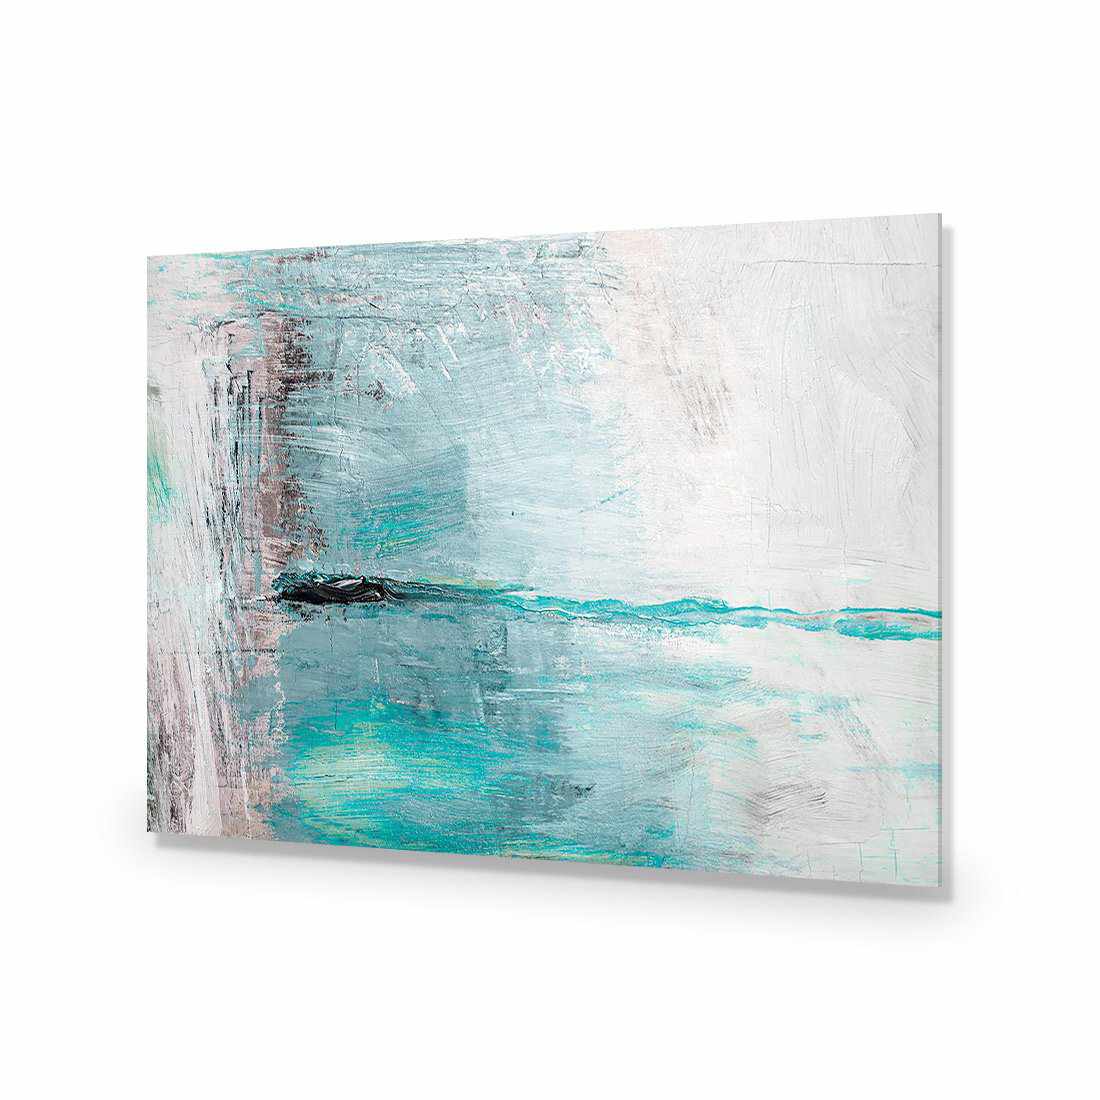 Painting The Sky-Acrylic-Wall Art Design-Without Border-Acrylic - No Frame-45x30cm-Wall Art Designs